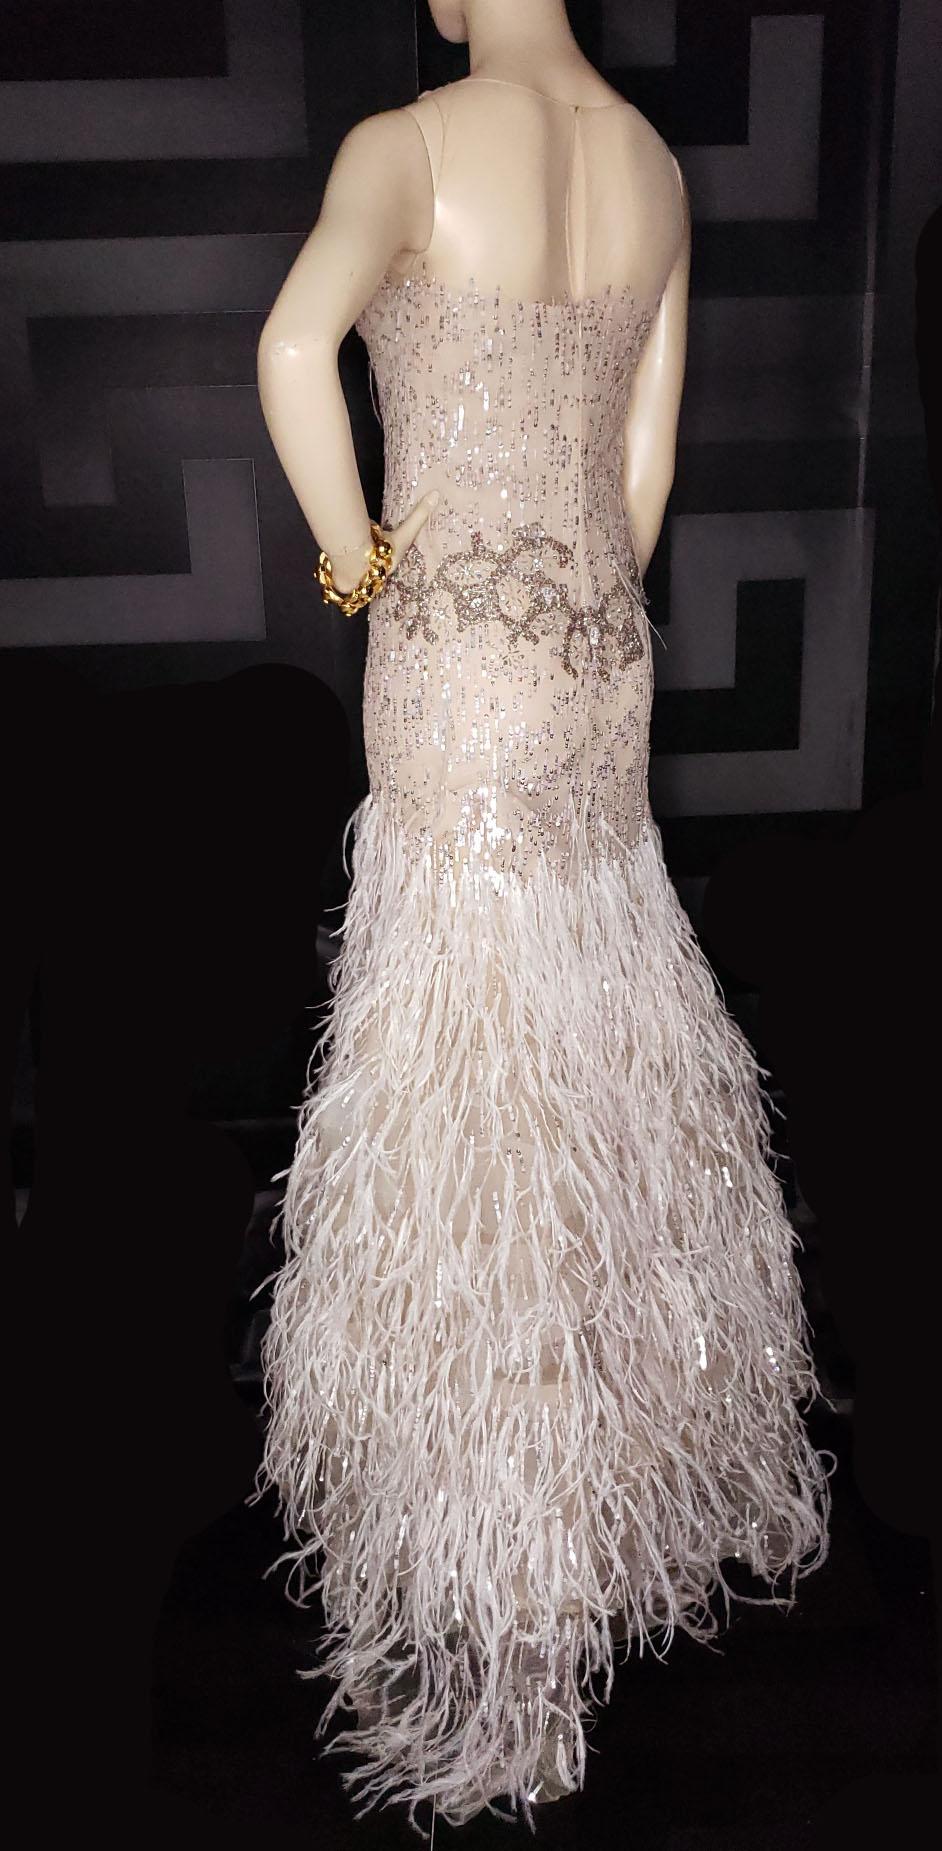 Beige OSCAR DE LA RENTA FEATHER and SEQUIN EMBELLISHED NUDE TULLE GOWN